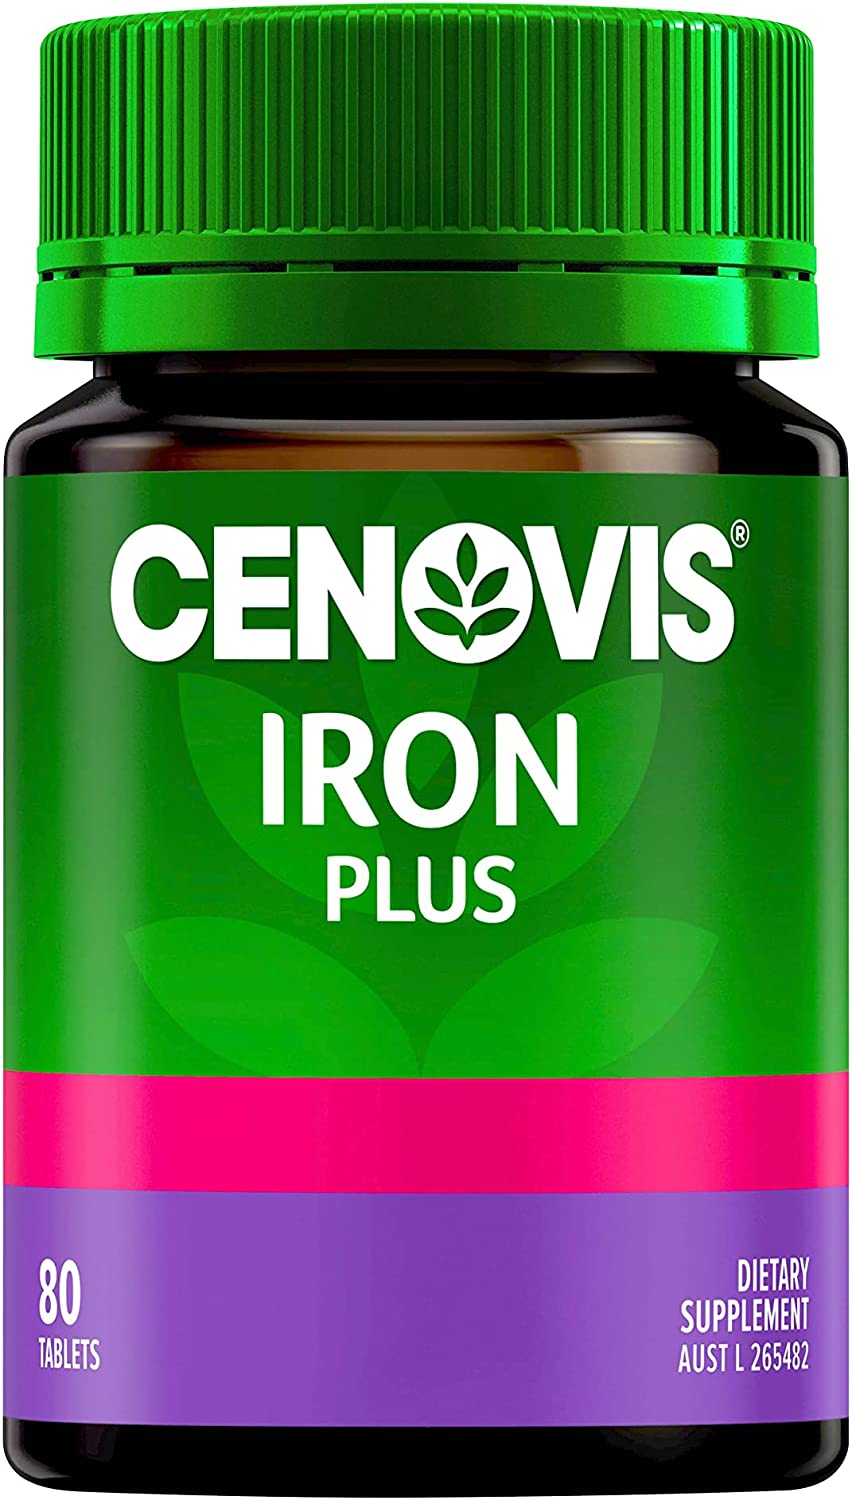 Cenovis Iron plus Tablets for Women'S Health - Relieves Fatigue and ...